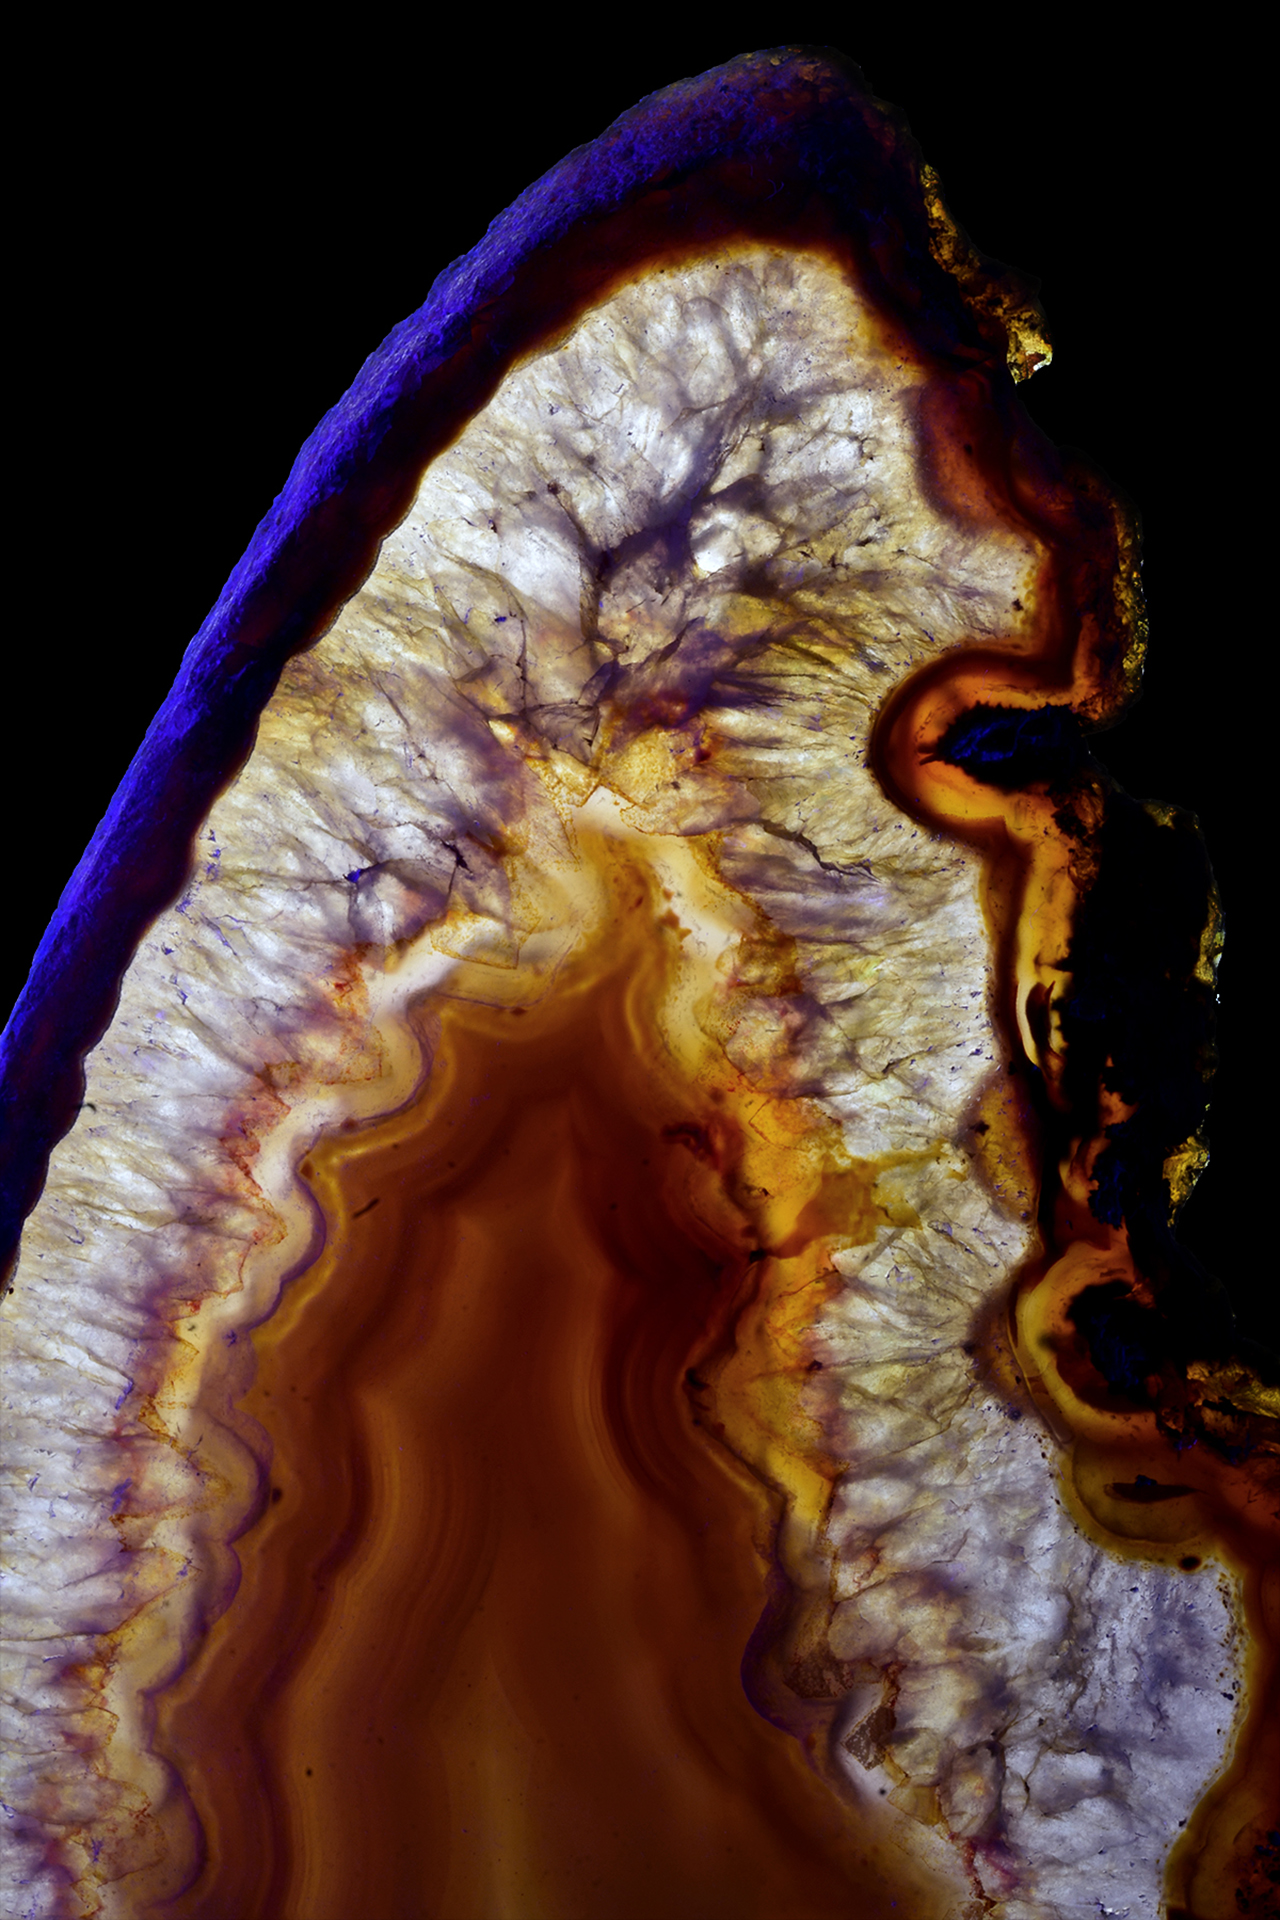 Wonderful shot of an agat slice, backlit to show off its inner beauty.